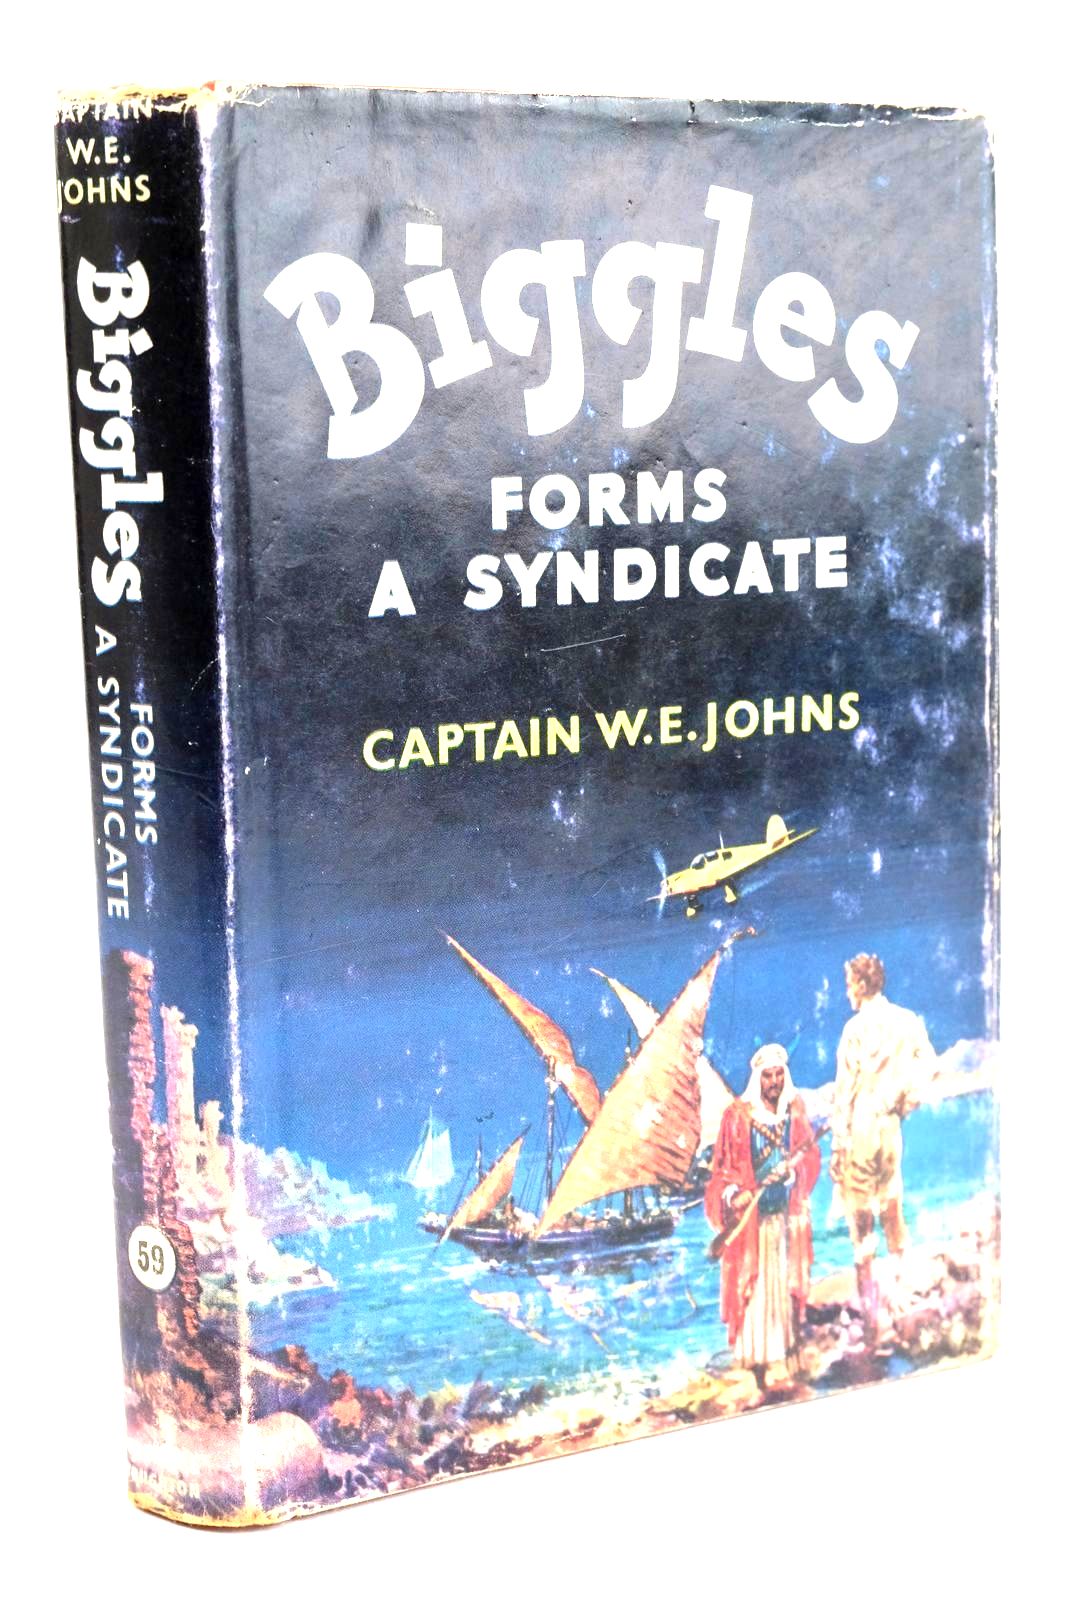 Photo of BIGGLES FORMS A SYNDICATE written by Johns, W.E. illustrated by Stead,  published by Hodder &amp; Stoughton (STOCK CODE: 1324266)  for sale by Stella & Rose's Books